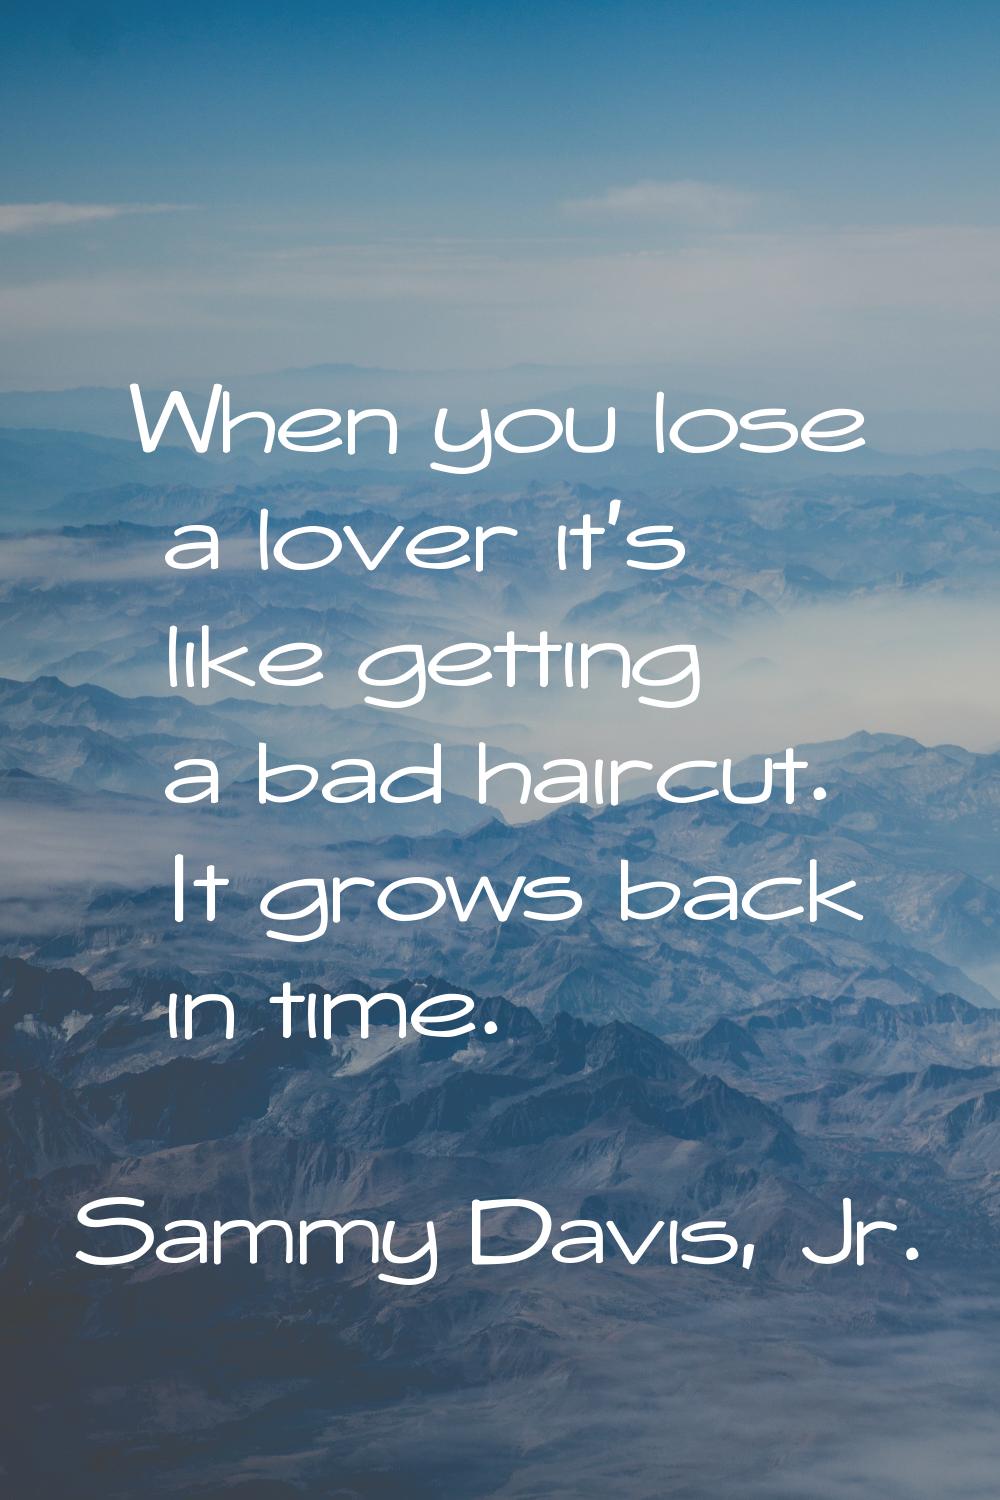 When you lose a lover it's like getting a bad haircut. It grows back in time.